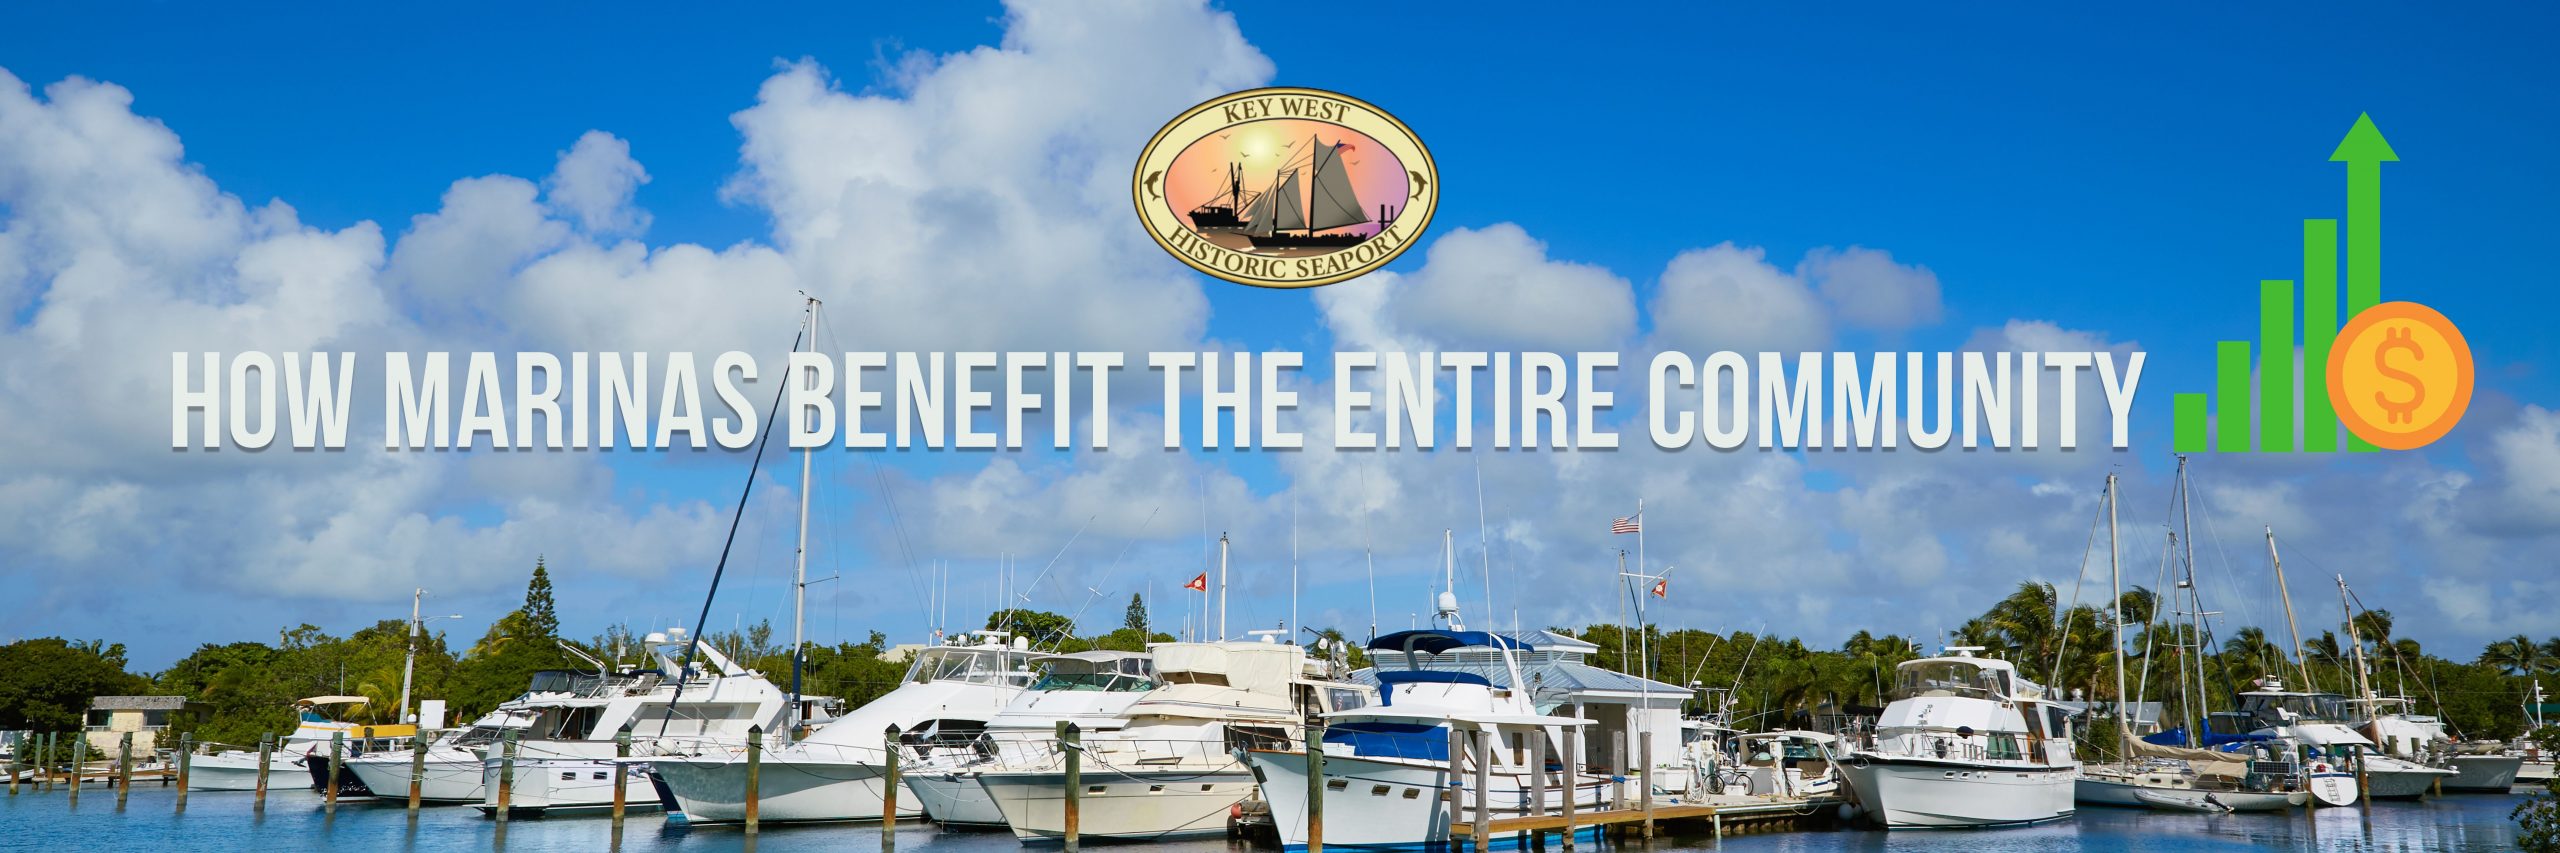 how marinas benefit the communtiy blog post cover photo